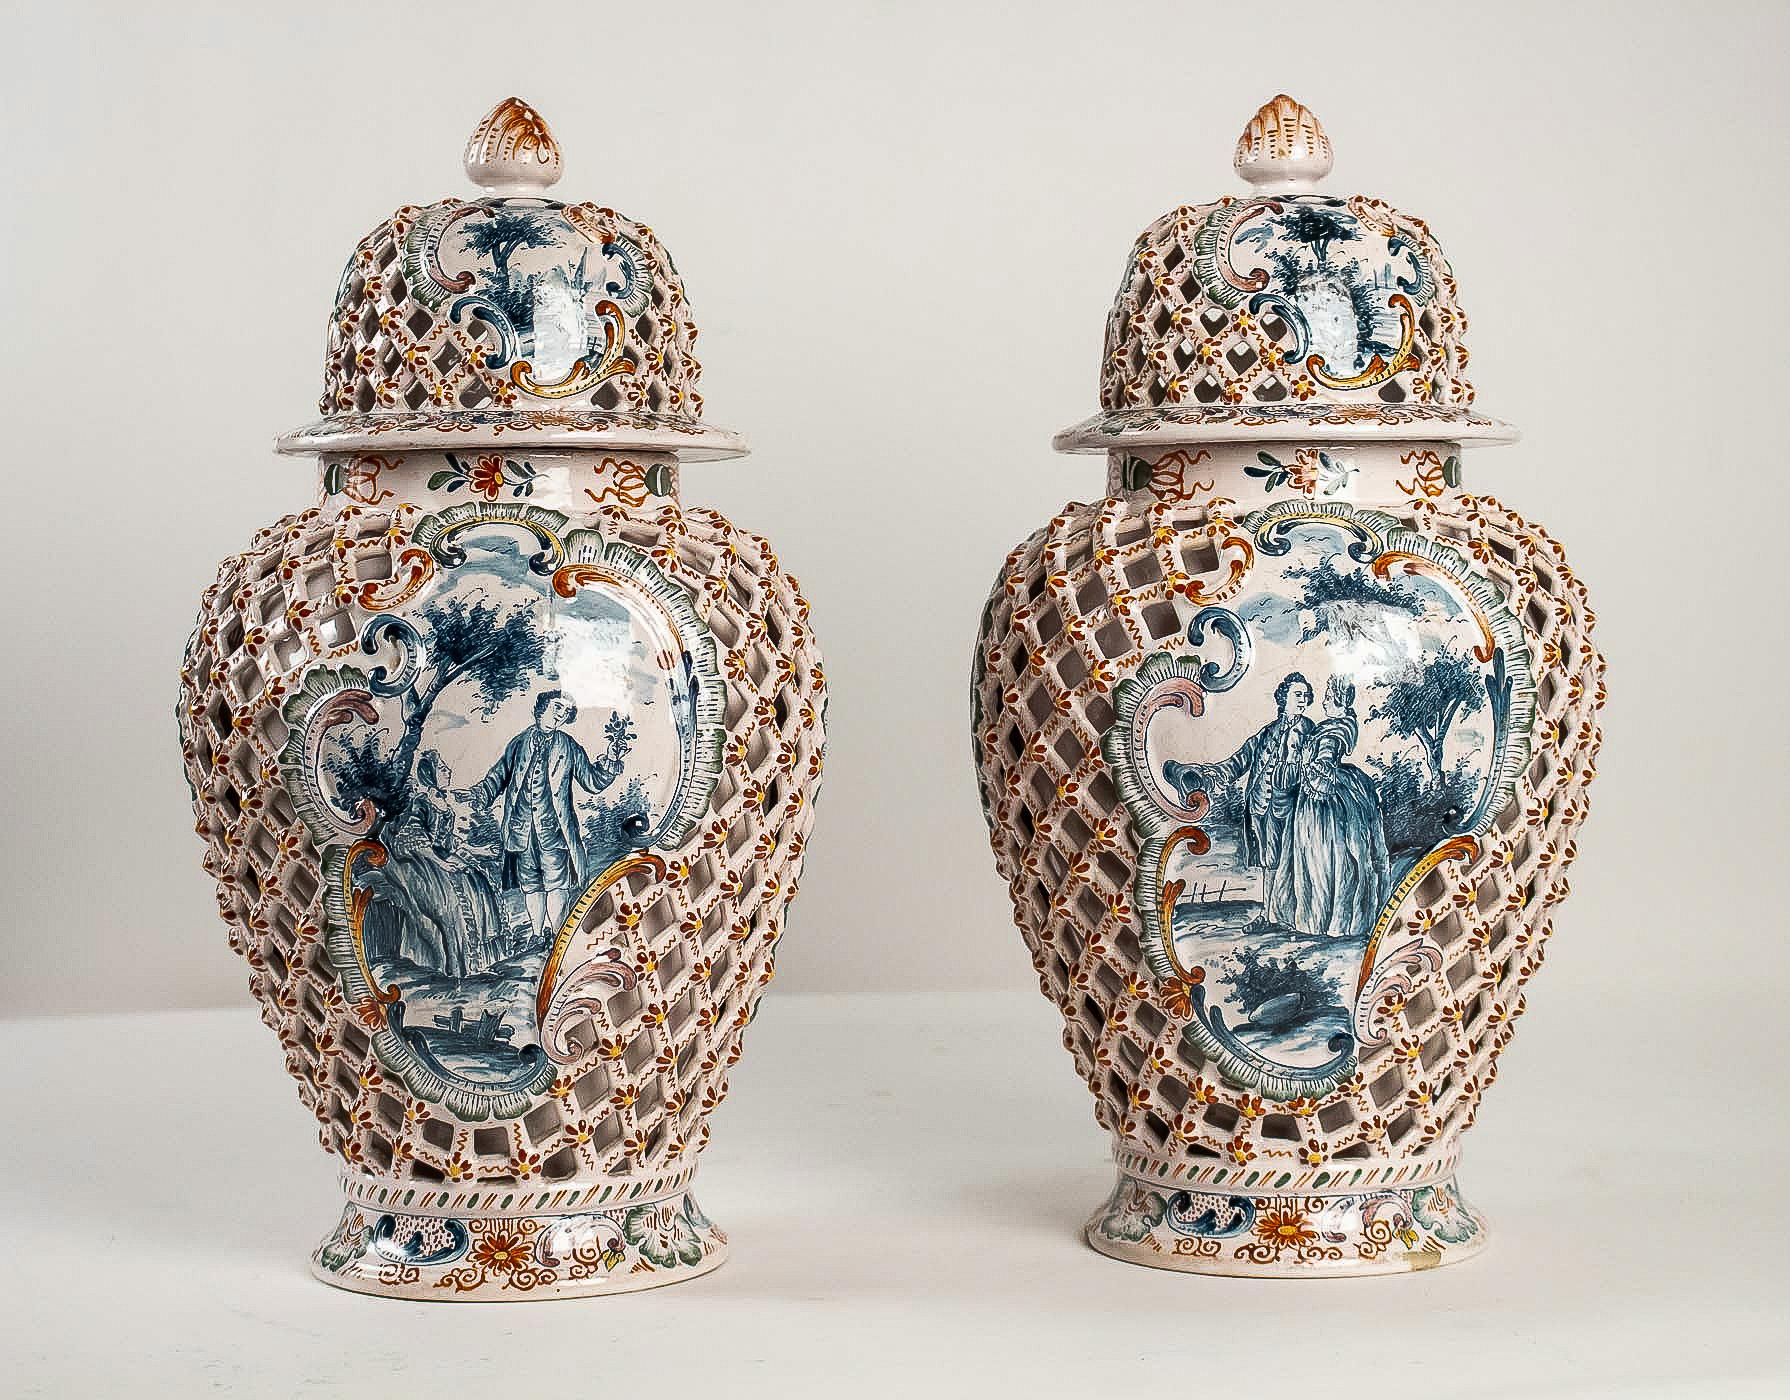 Dutch early-19th century, polychrome delft faience pair of vases, circa 1810-1818

A beautiful and rare delft faience polychrome pair of vases, decorated with a courteous and farmer scenes in the center and in Rocaille style in red, blue et gold